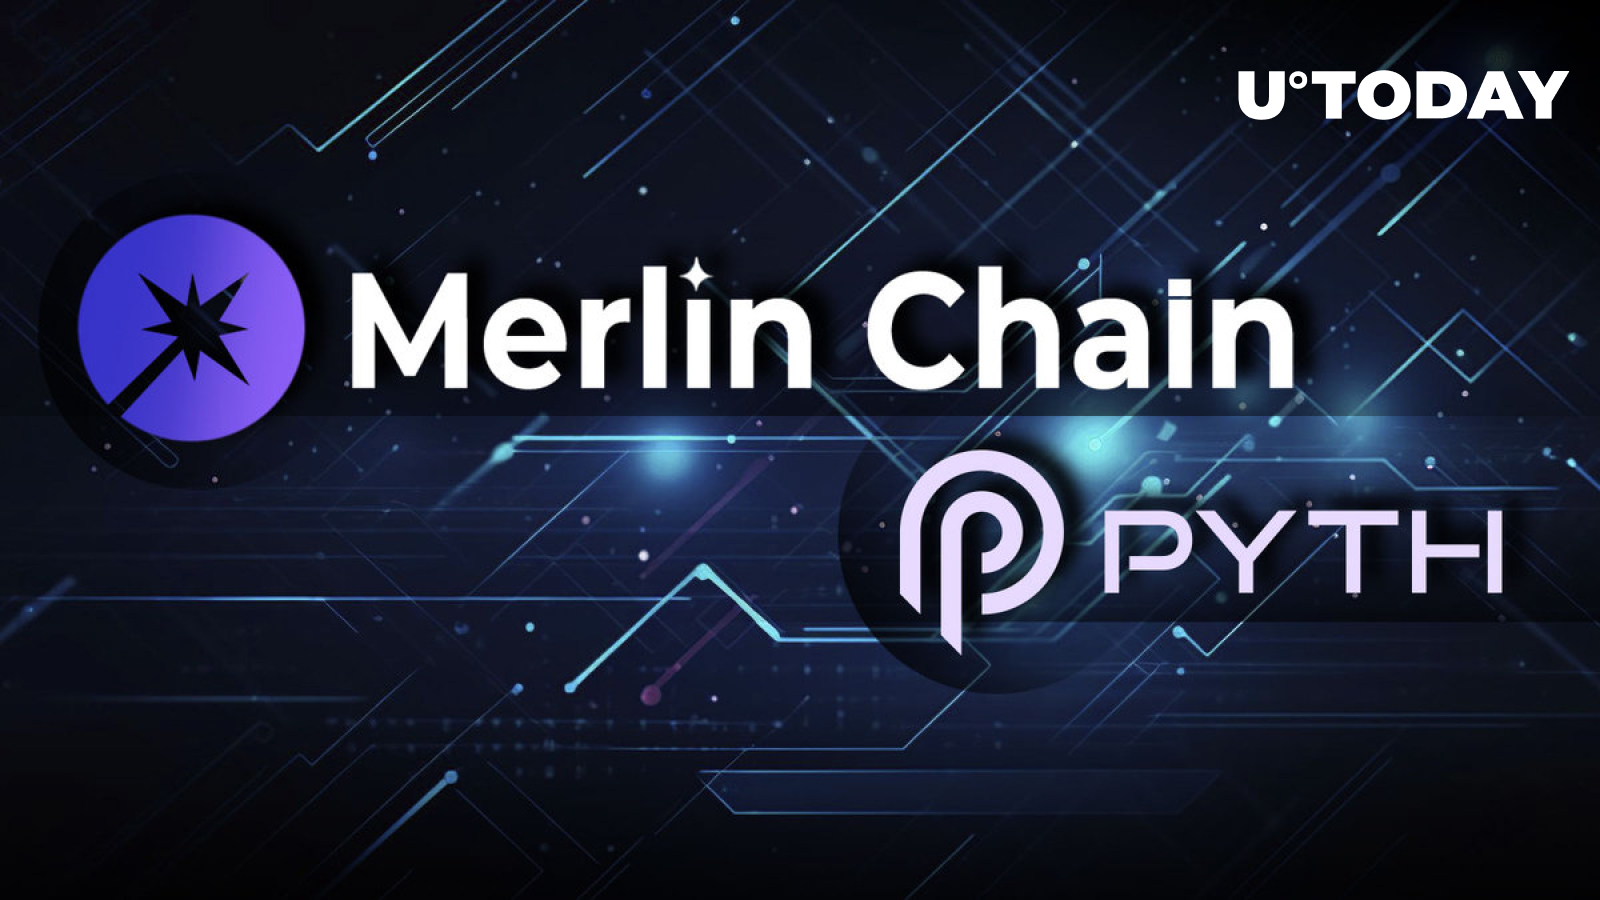 Merlin Chain Welcomes Pyth Oracle for Enhanced Bitcoin DeFi Applications